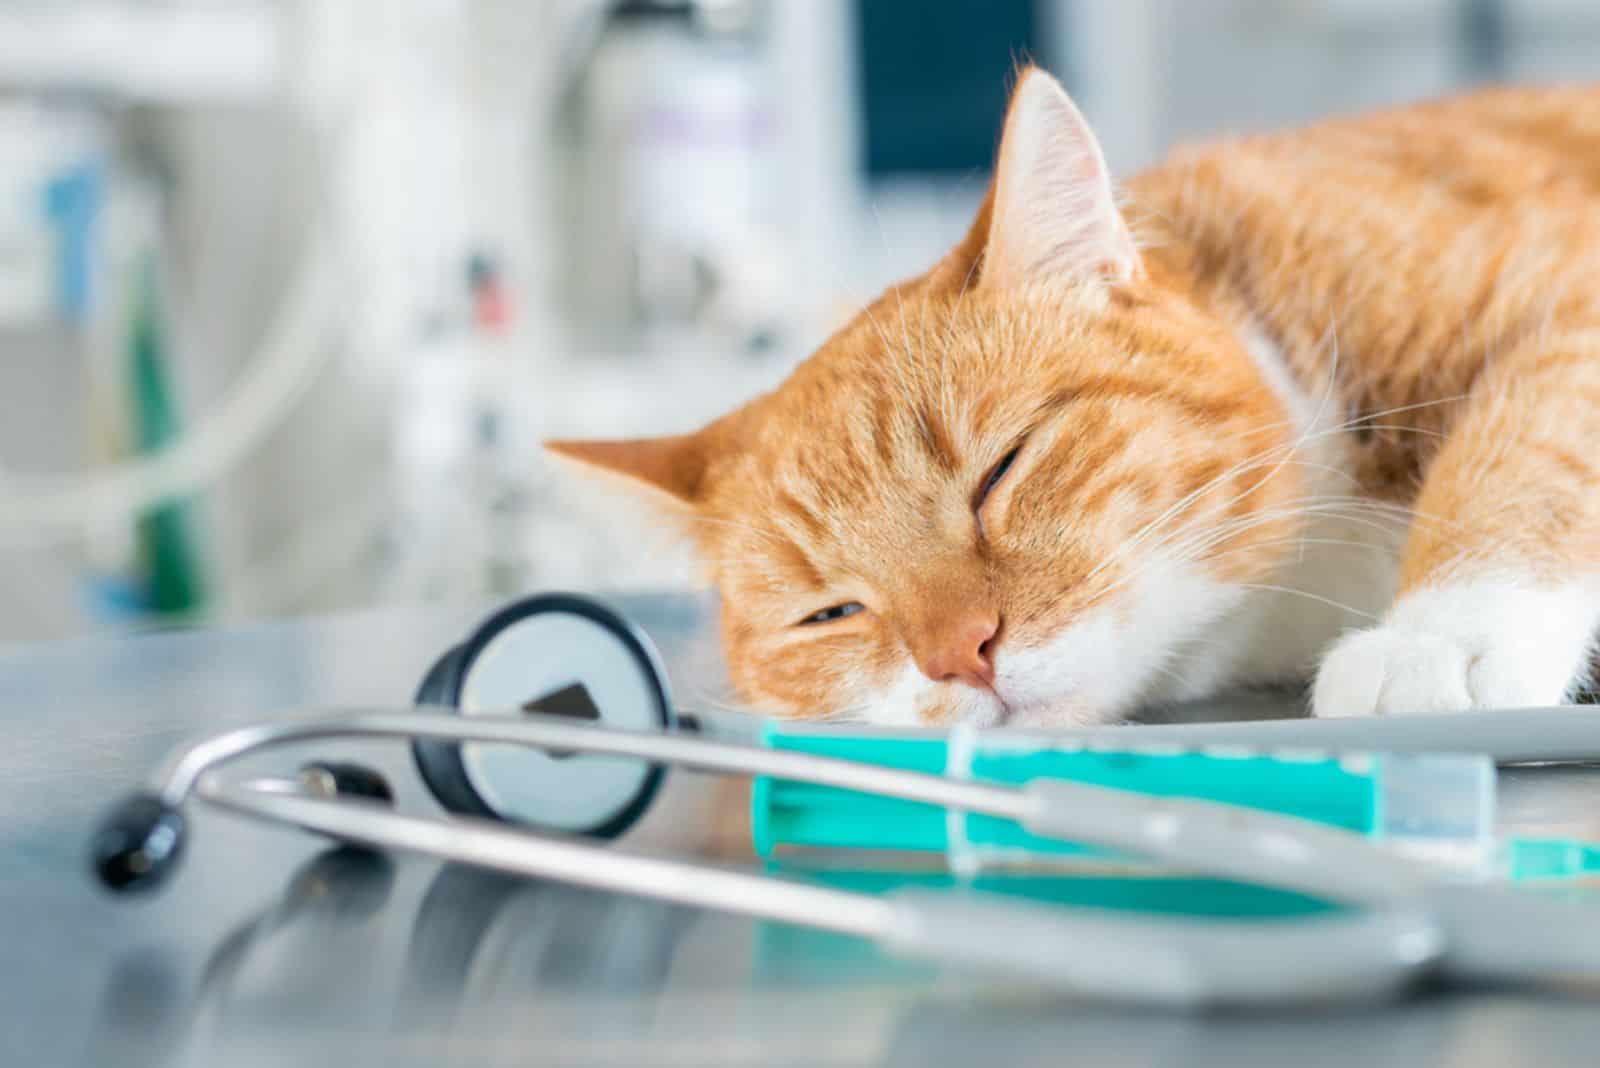  ginger sleeping cat lying on a table near a syringe and a stethoscope